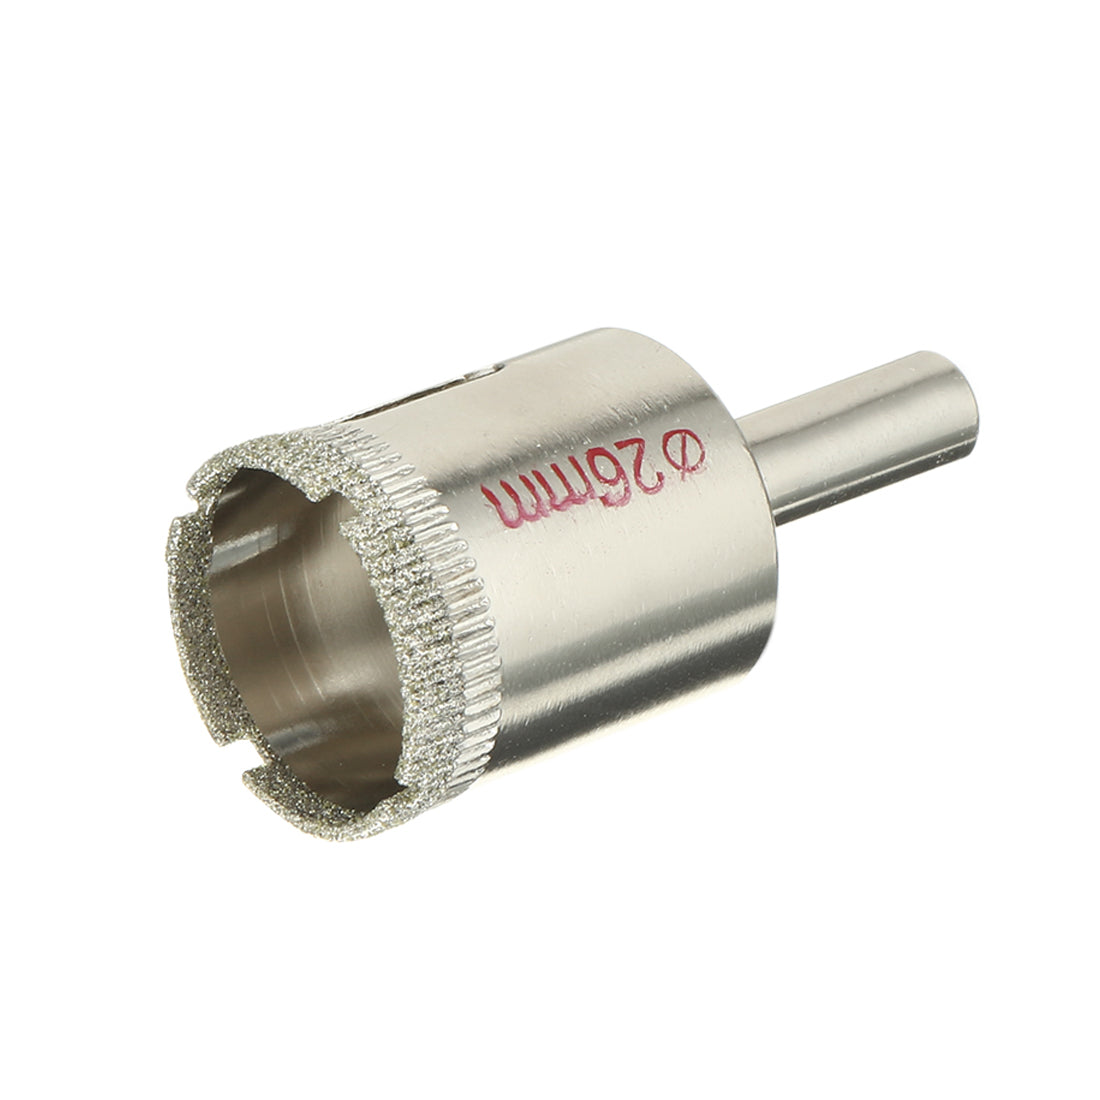 uxcell Uxcell Diamond Coated Glass Hole Saw Drill Bit for Ceramic Tile